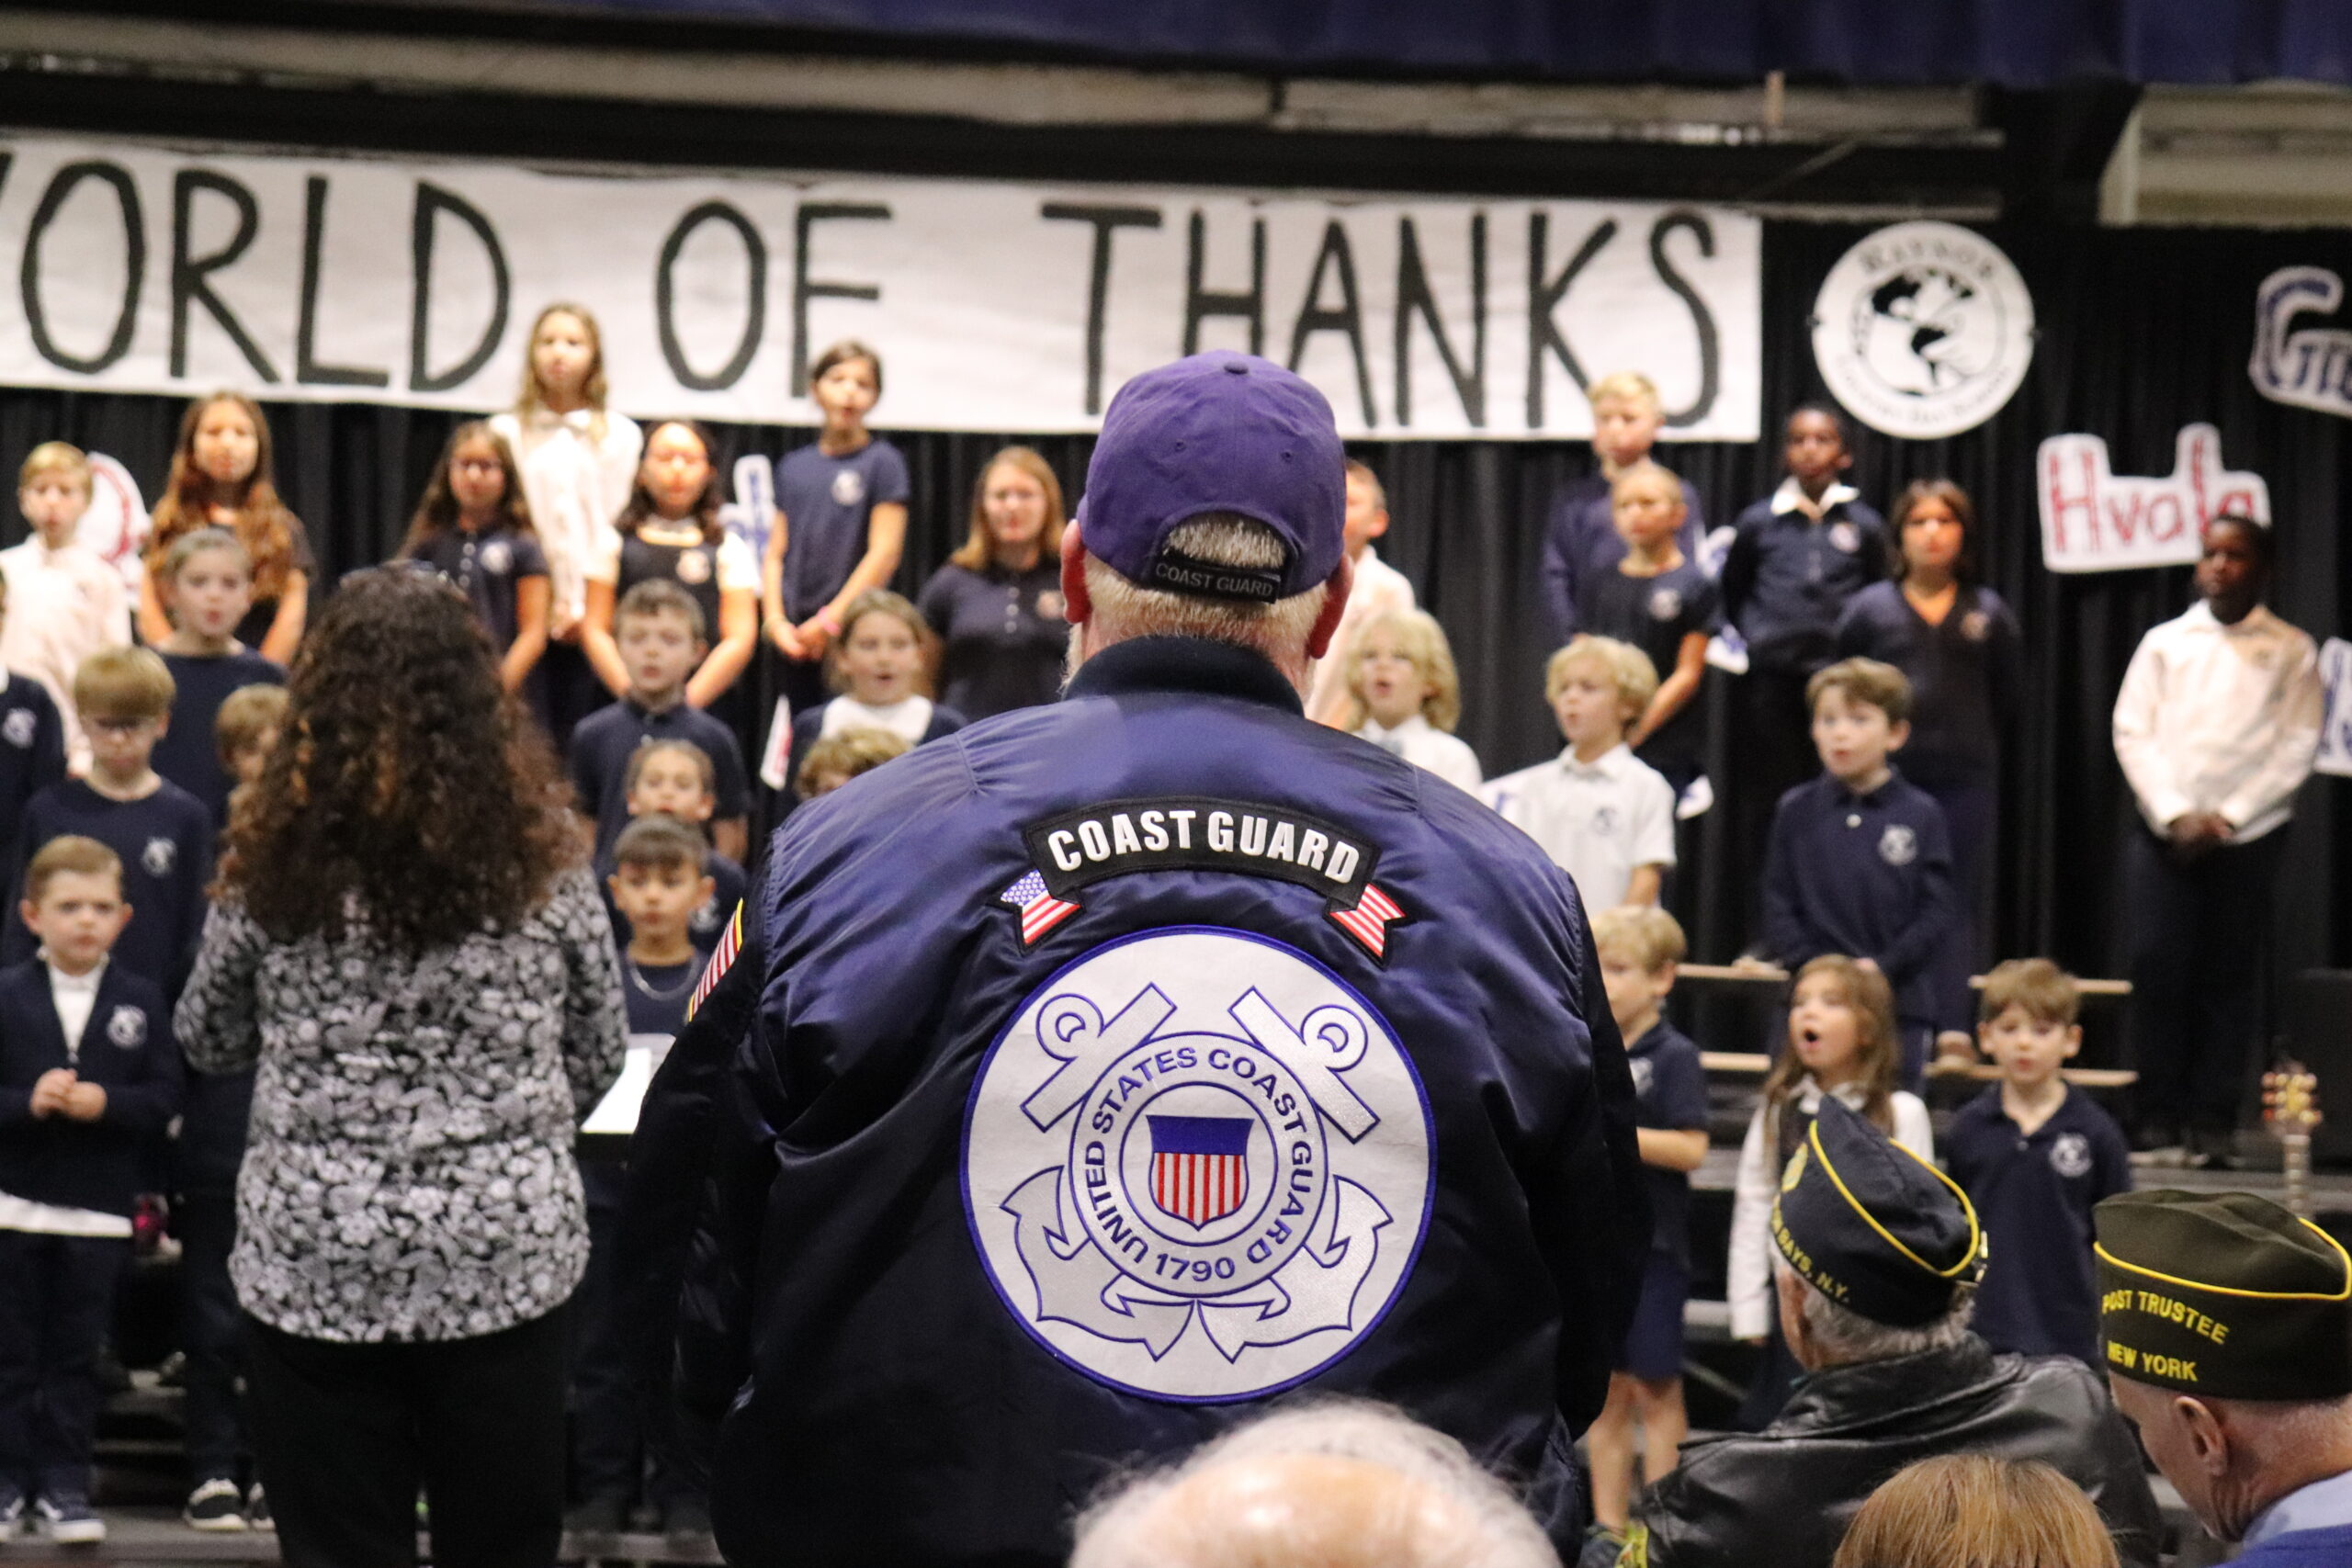 More than 50 veterans turned out for the annual Veterans Day ceremony at Raynor Country Day School on November 3. COURTESY RAYNOR COUNTRY DAY SCHOOL